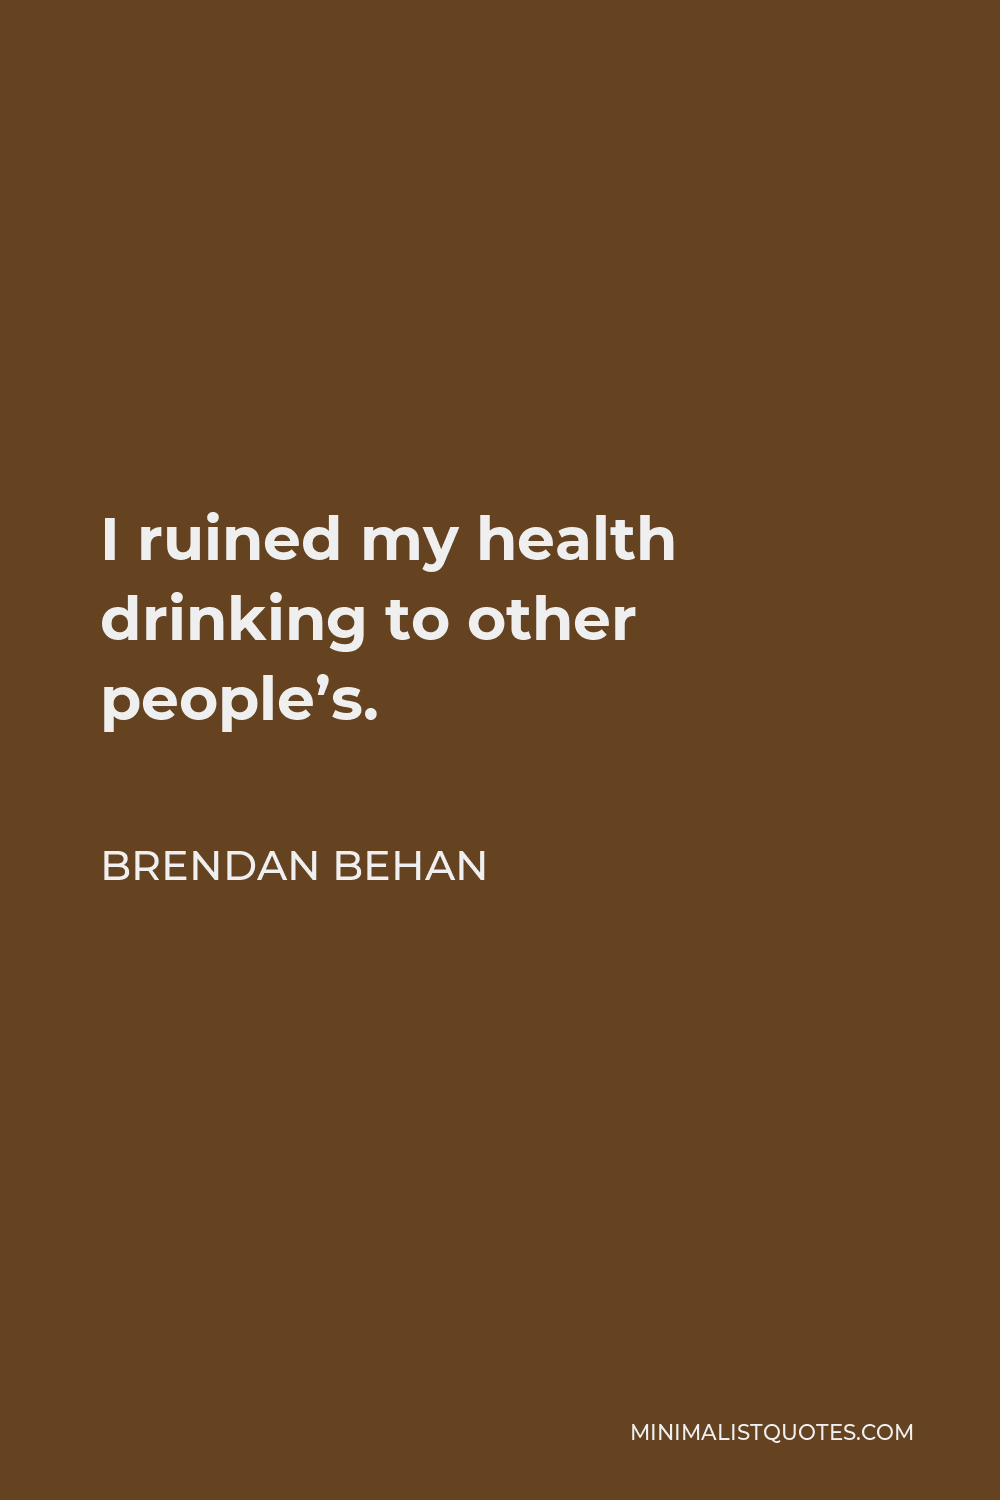 Brendan Behan Quote - I ruined my health drinking to other people’s.